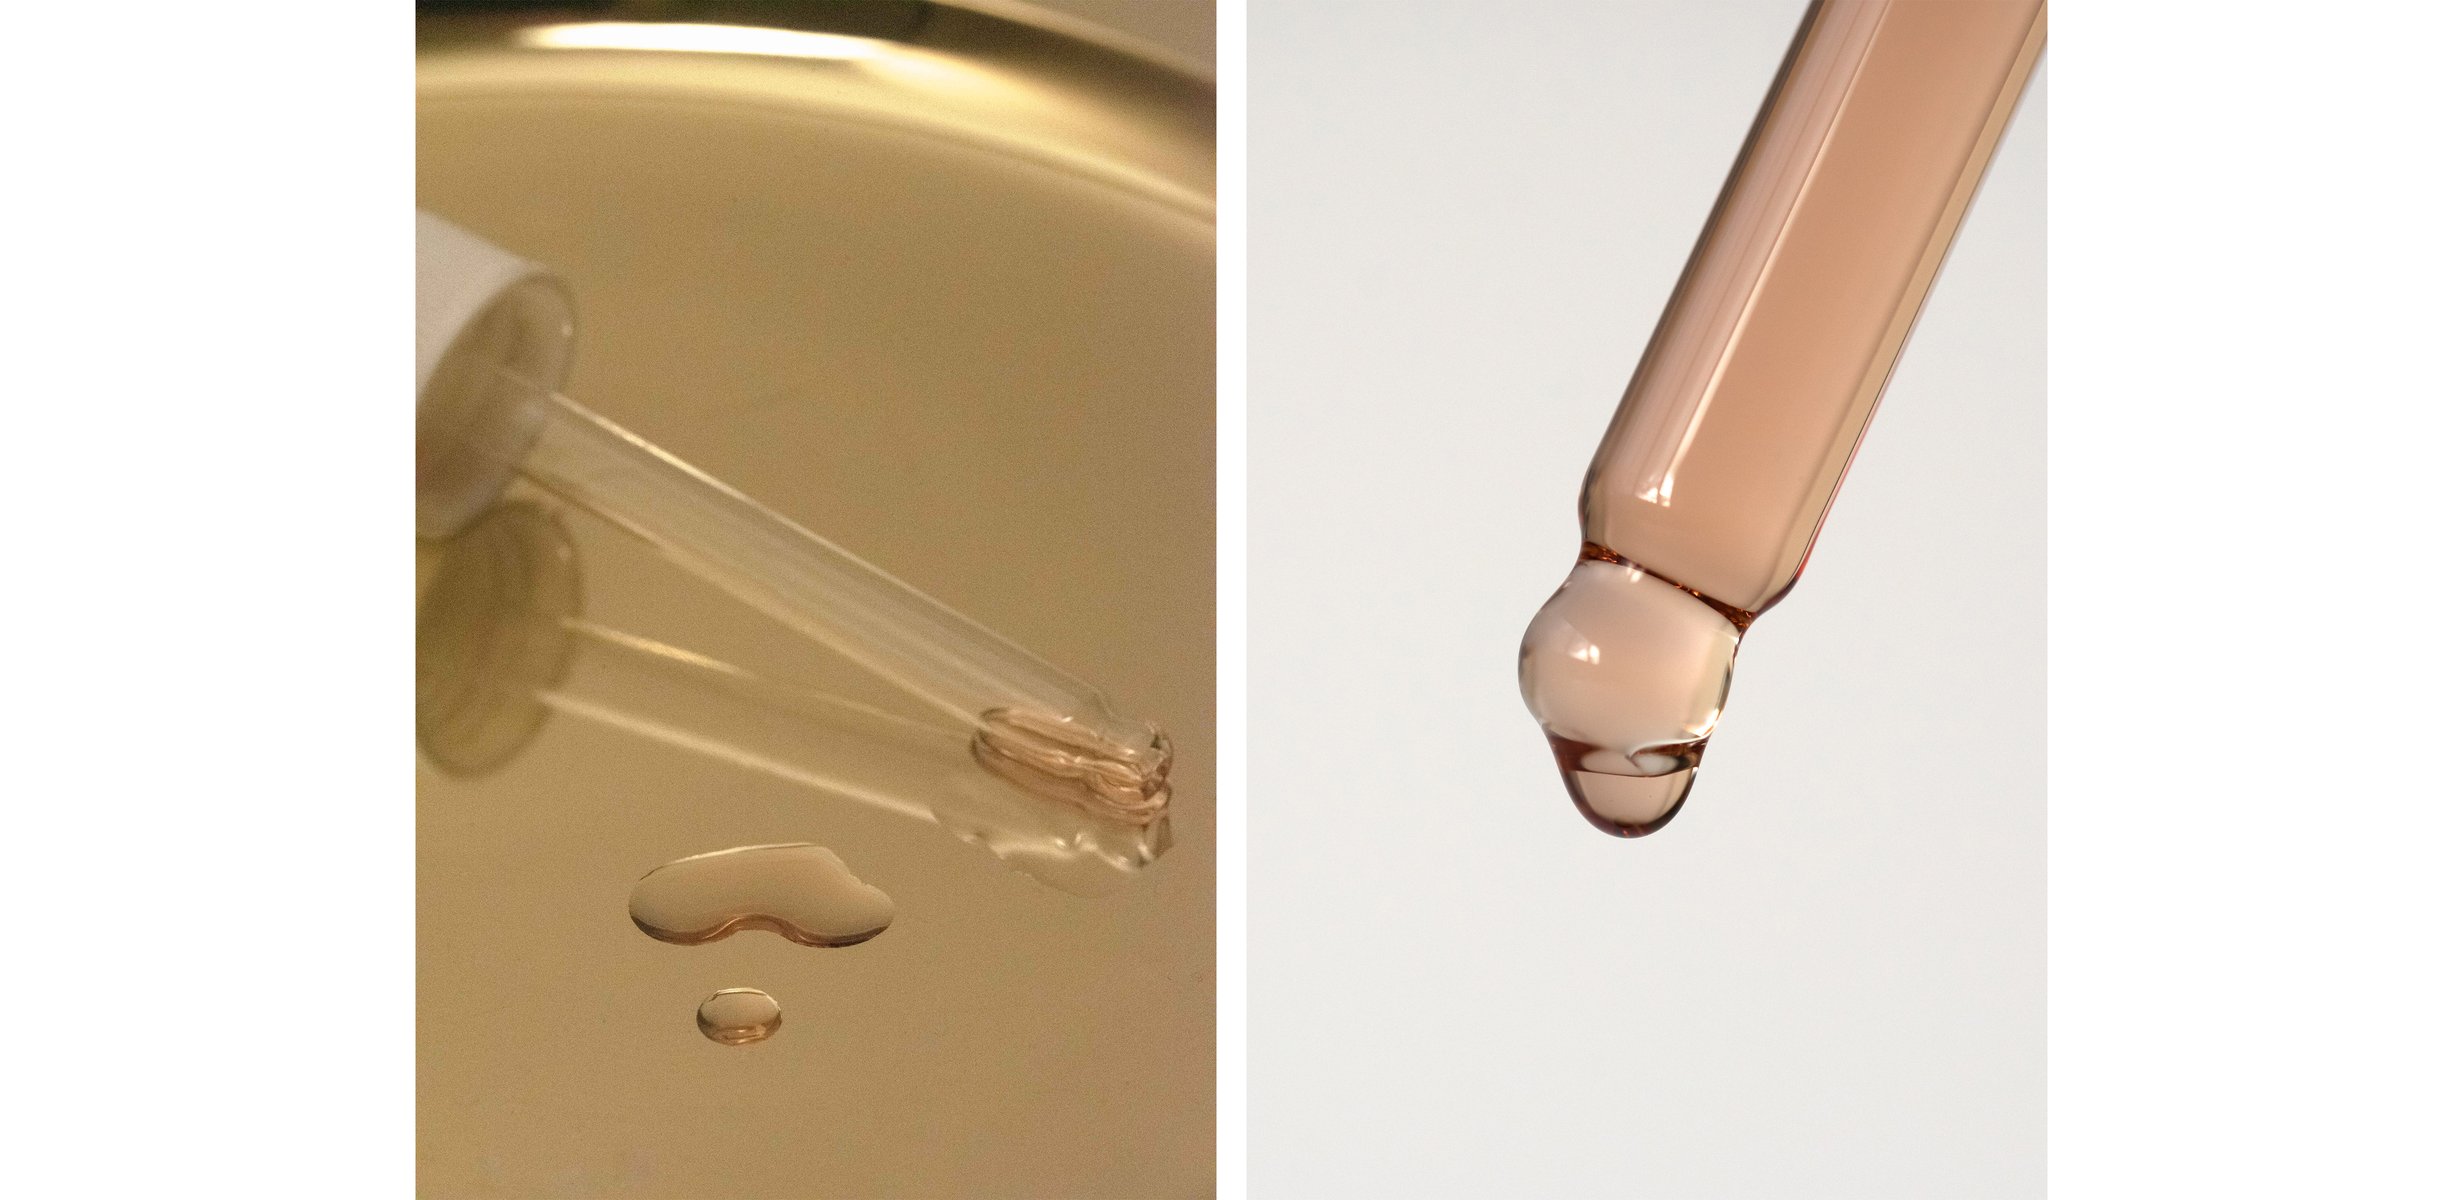  Diptych:

Left image: an empty glass dropper resting on a golden plate with a drop of CBD oil spilled on it.

Right image: macro image of a drop of peachy-pink CBD oil in a glass dropper. by Sydney SG